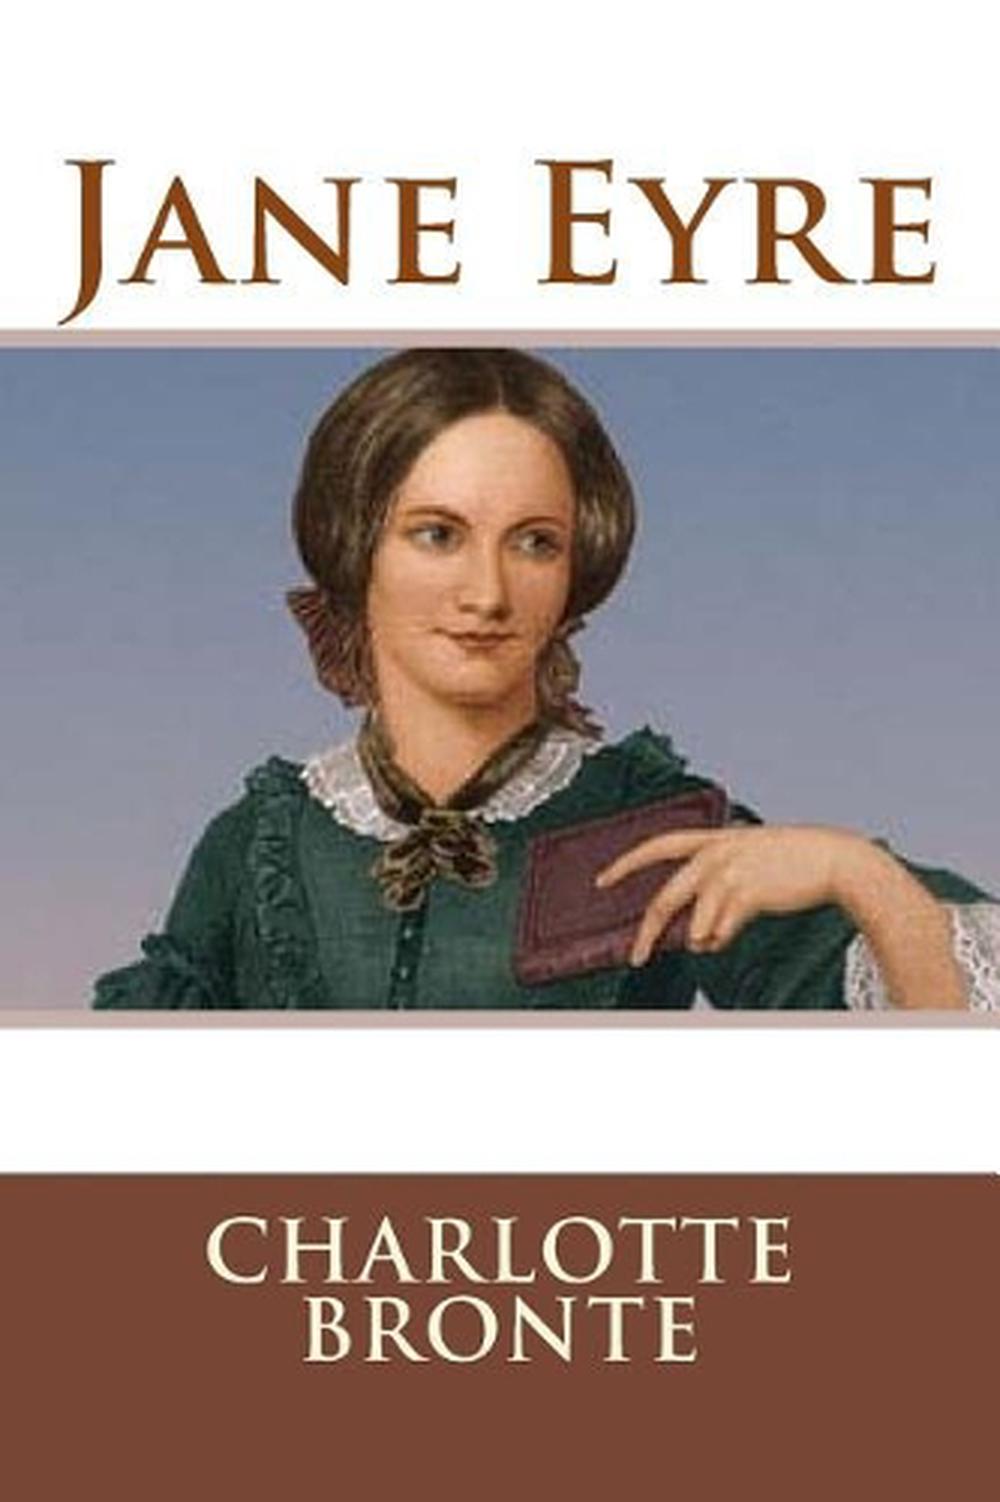 book report on jane eyre